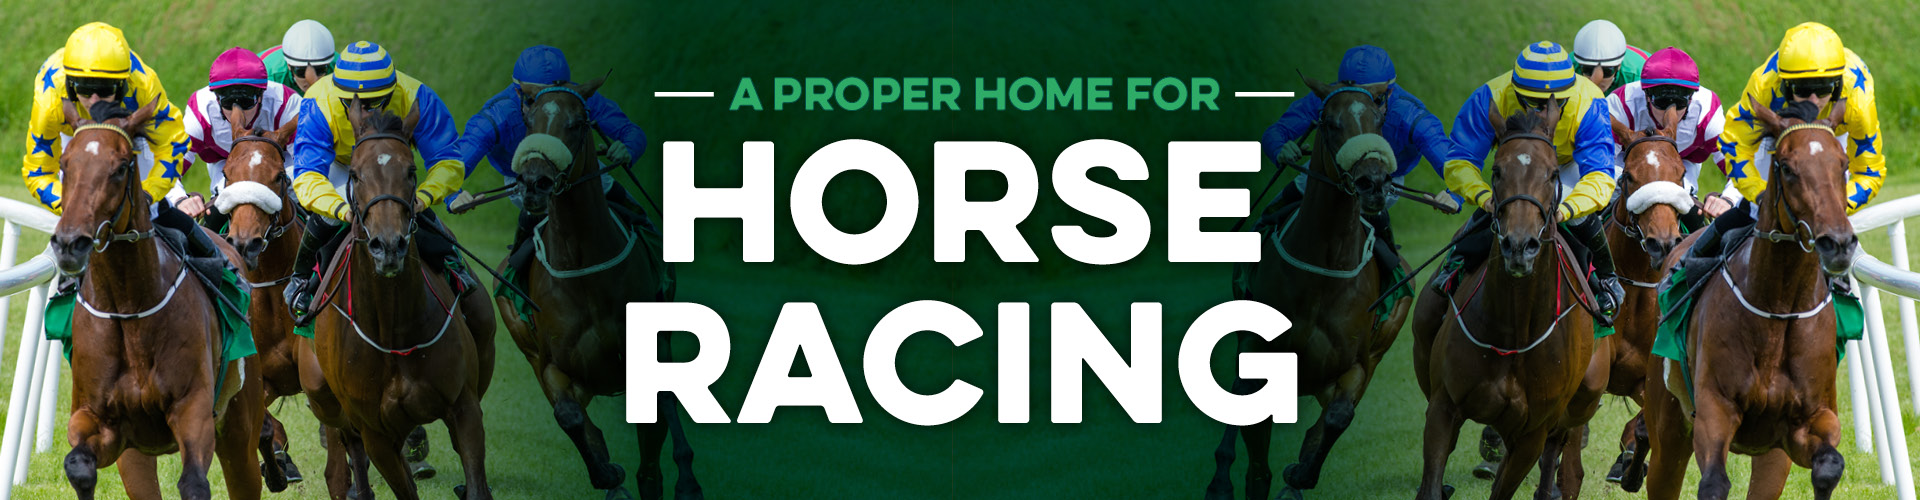 Watch horse racing live at The Admiral Rodney pub